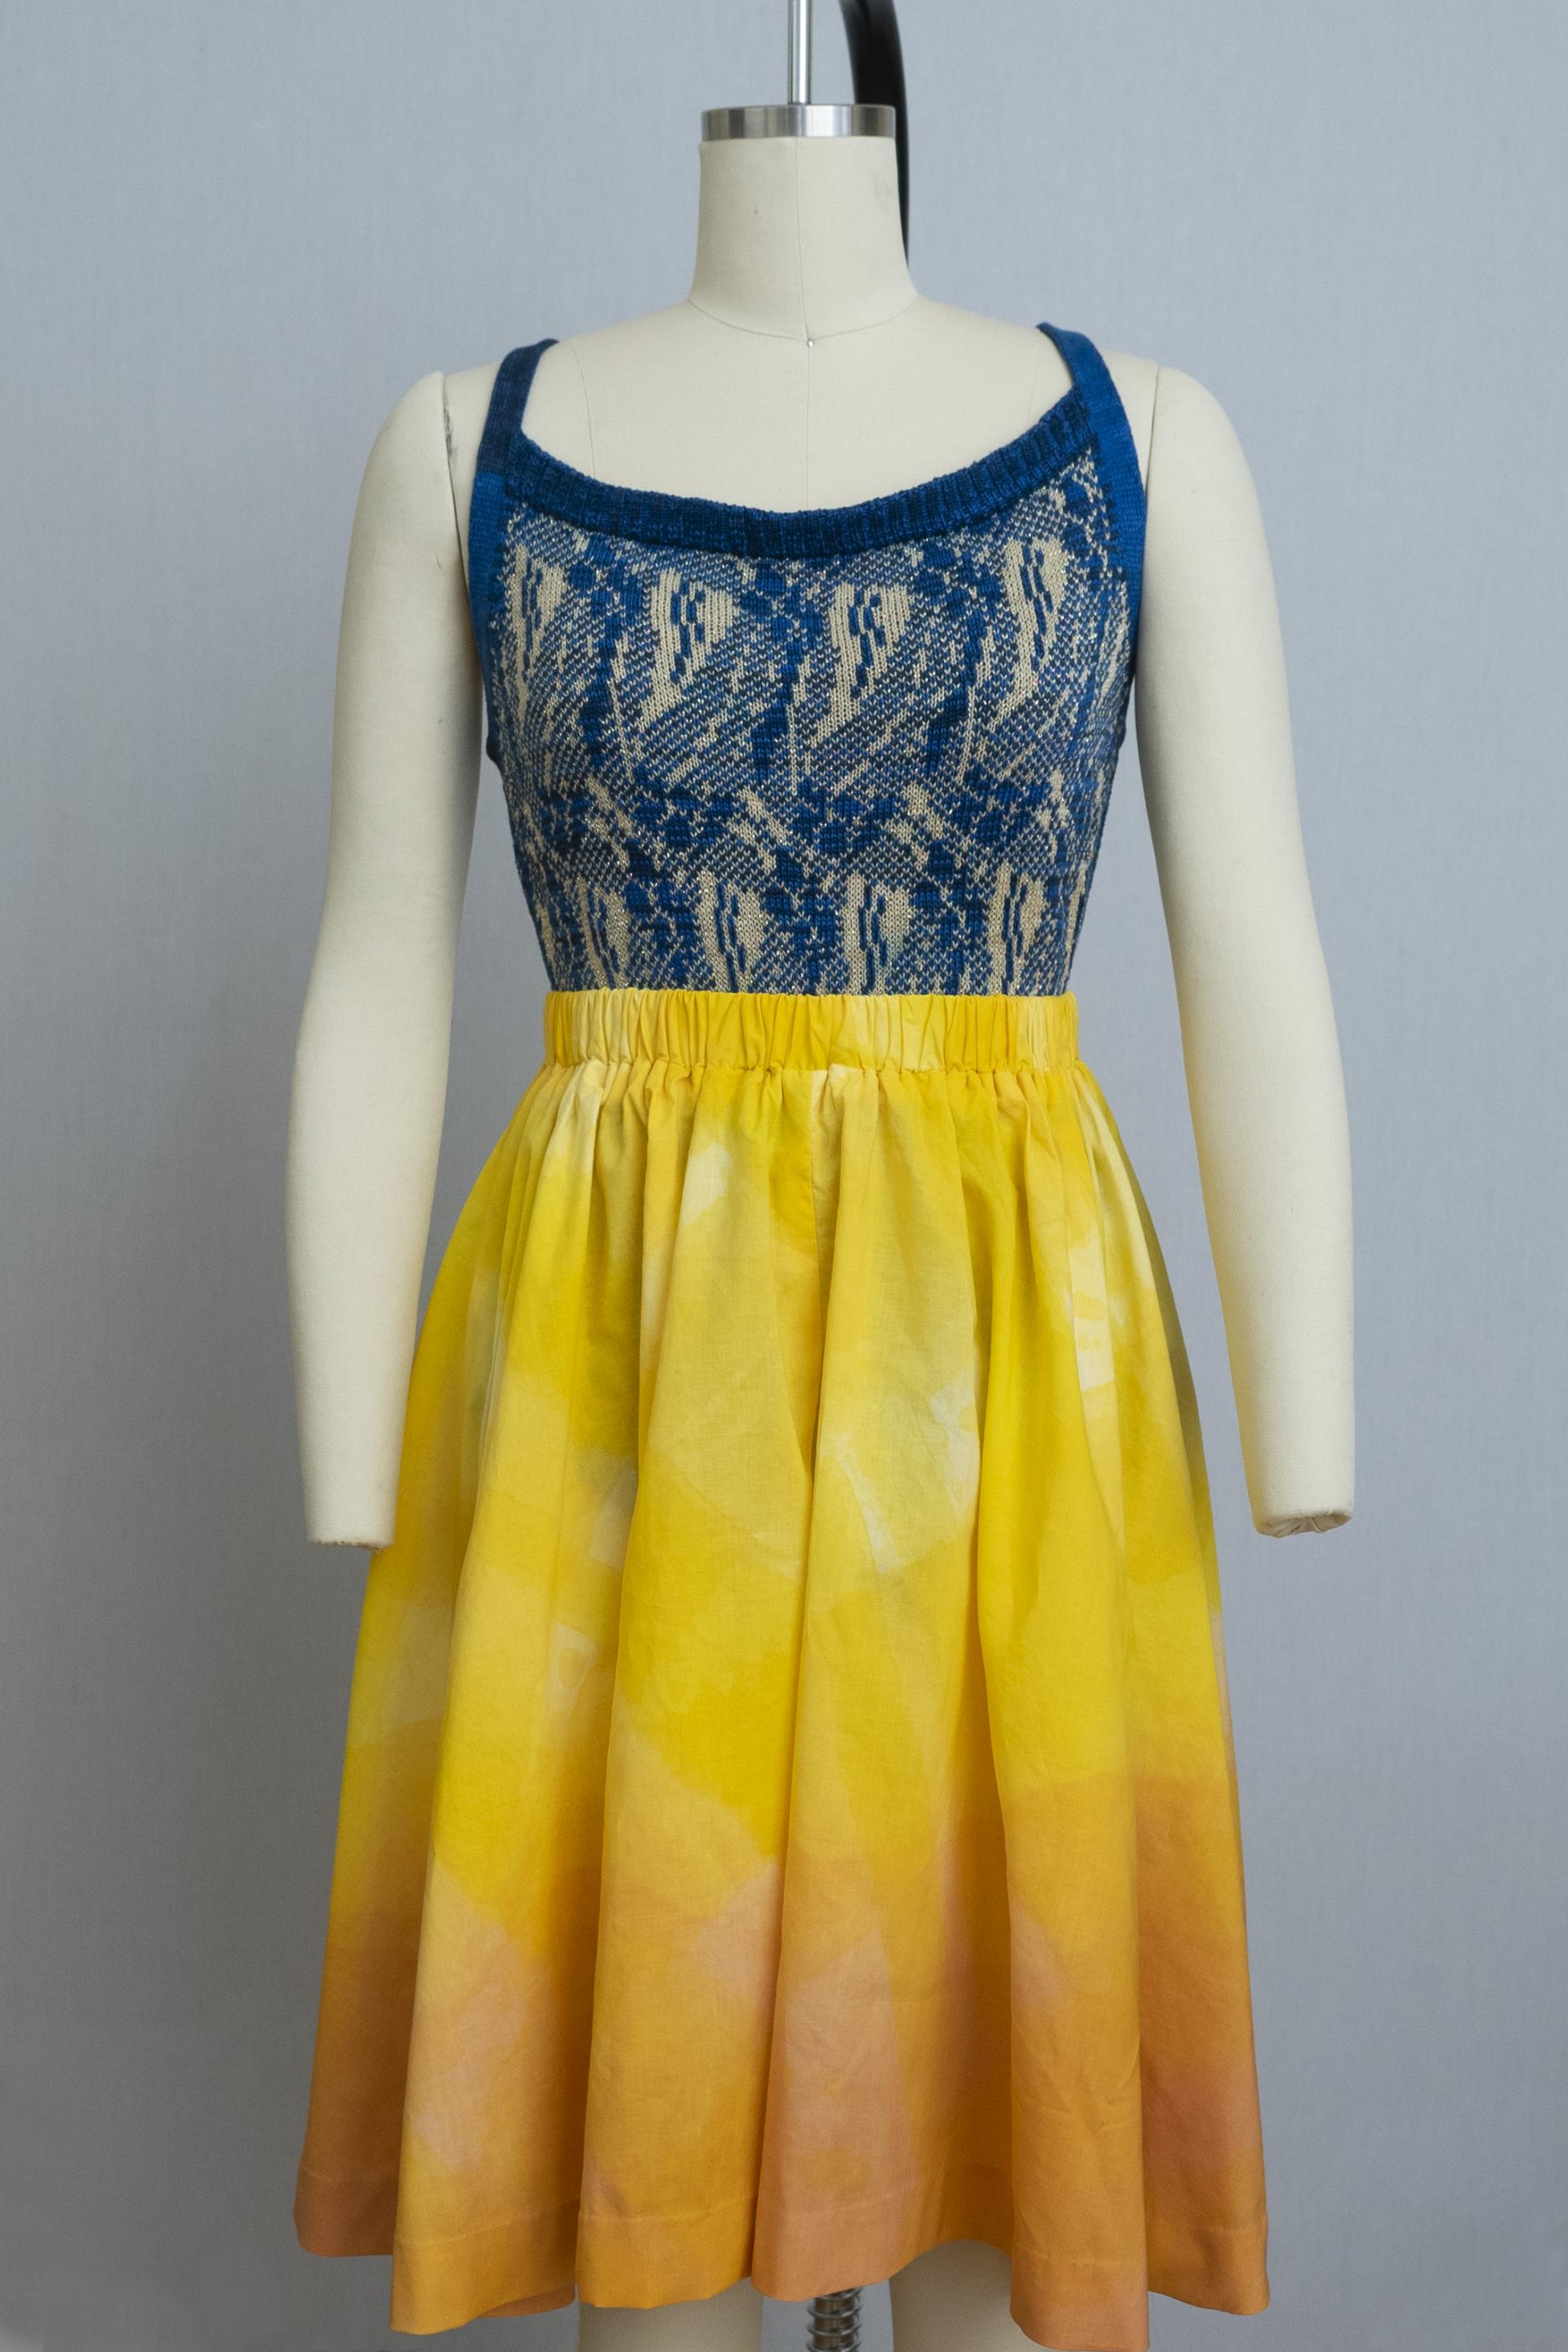 dress form wearing blue knit playsuit and wide leg pants in an orange-yellow ombre